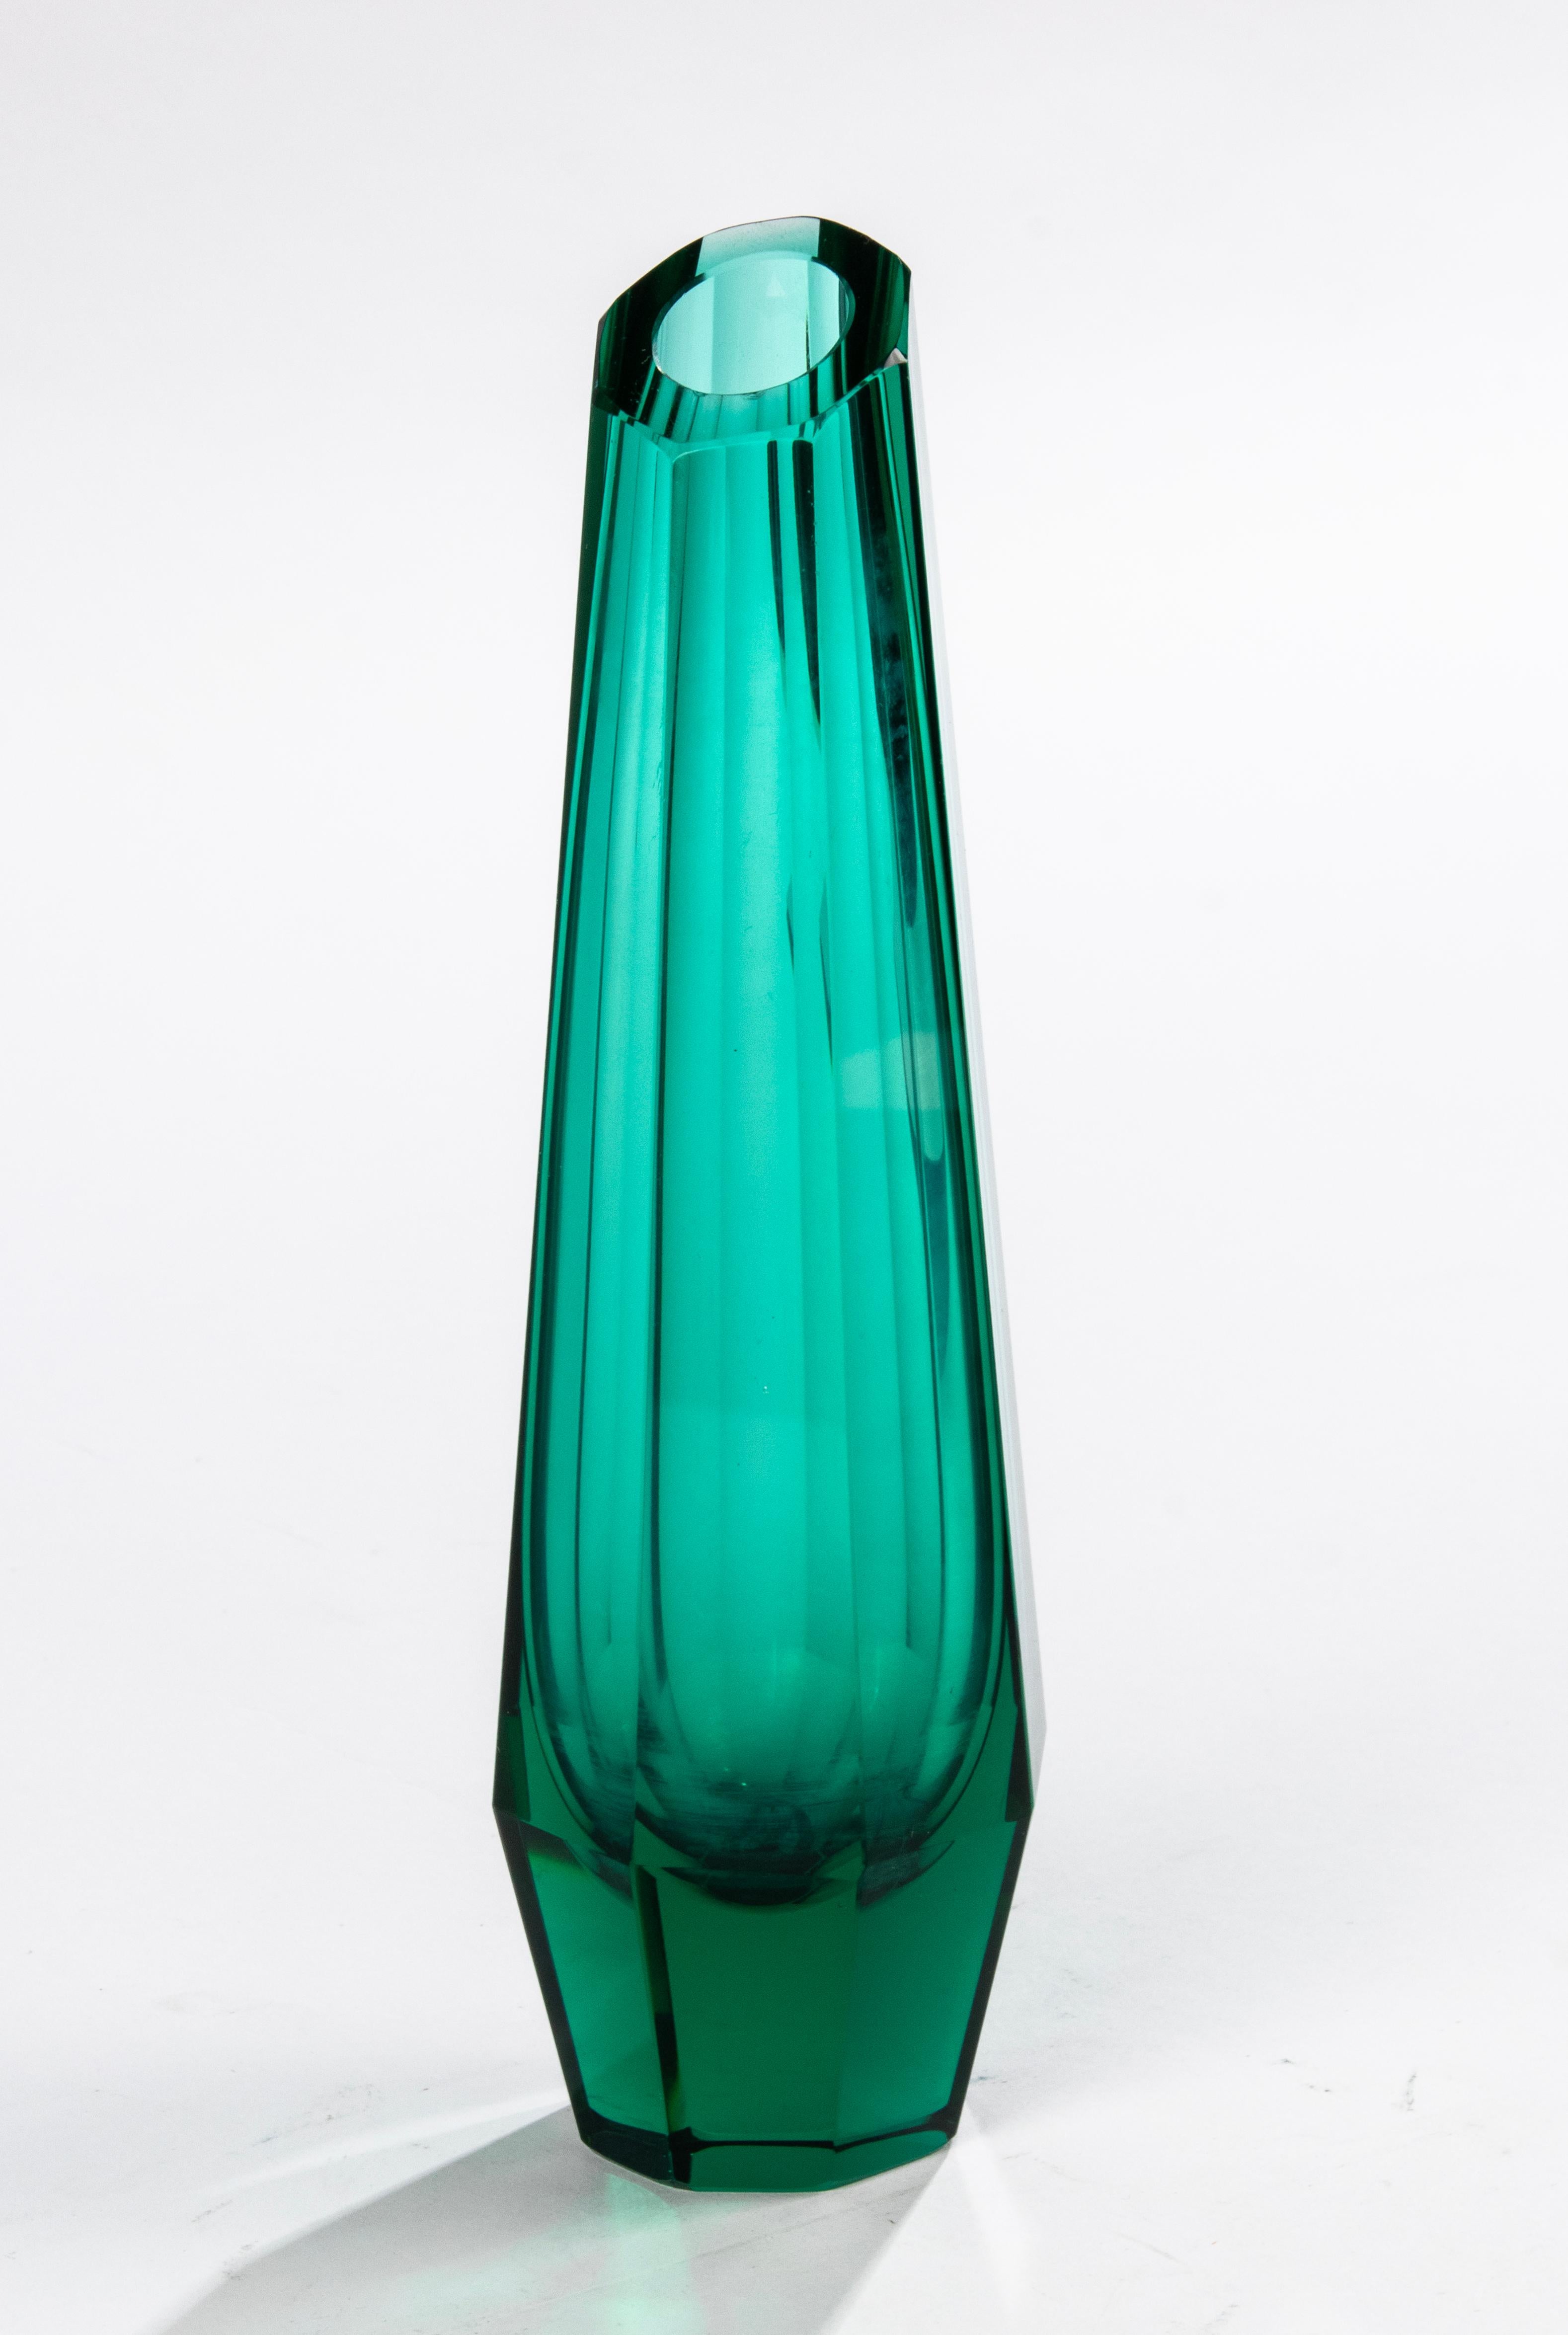 Beautiful art deco faceted crystal vase attributed to Josef Hoffmann for Moser (Czechoslovakia, 1930s). The vase is made of beautifully faceted thick emerald/forest green crystal glass.
The vase is in very good condition. 

Dimensions: 6,5 x 6,5 cm